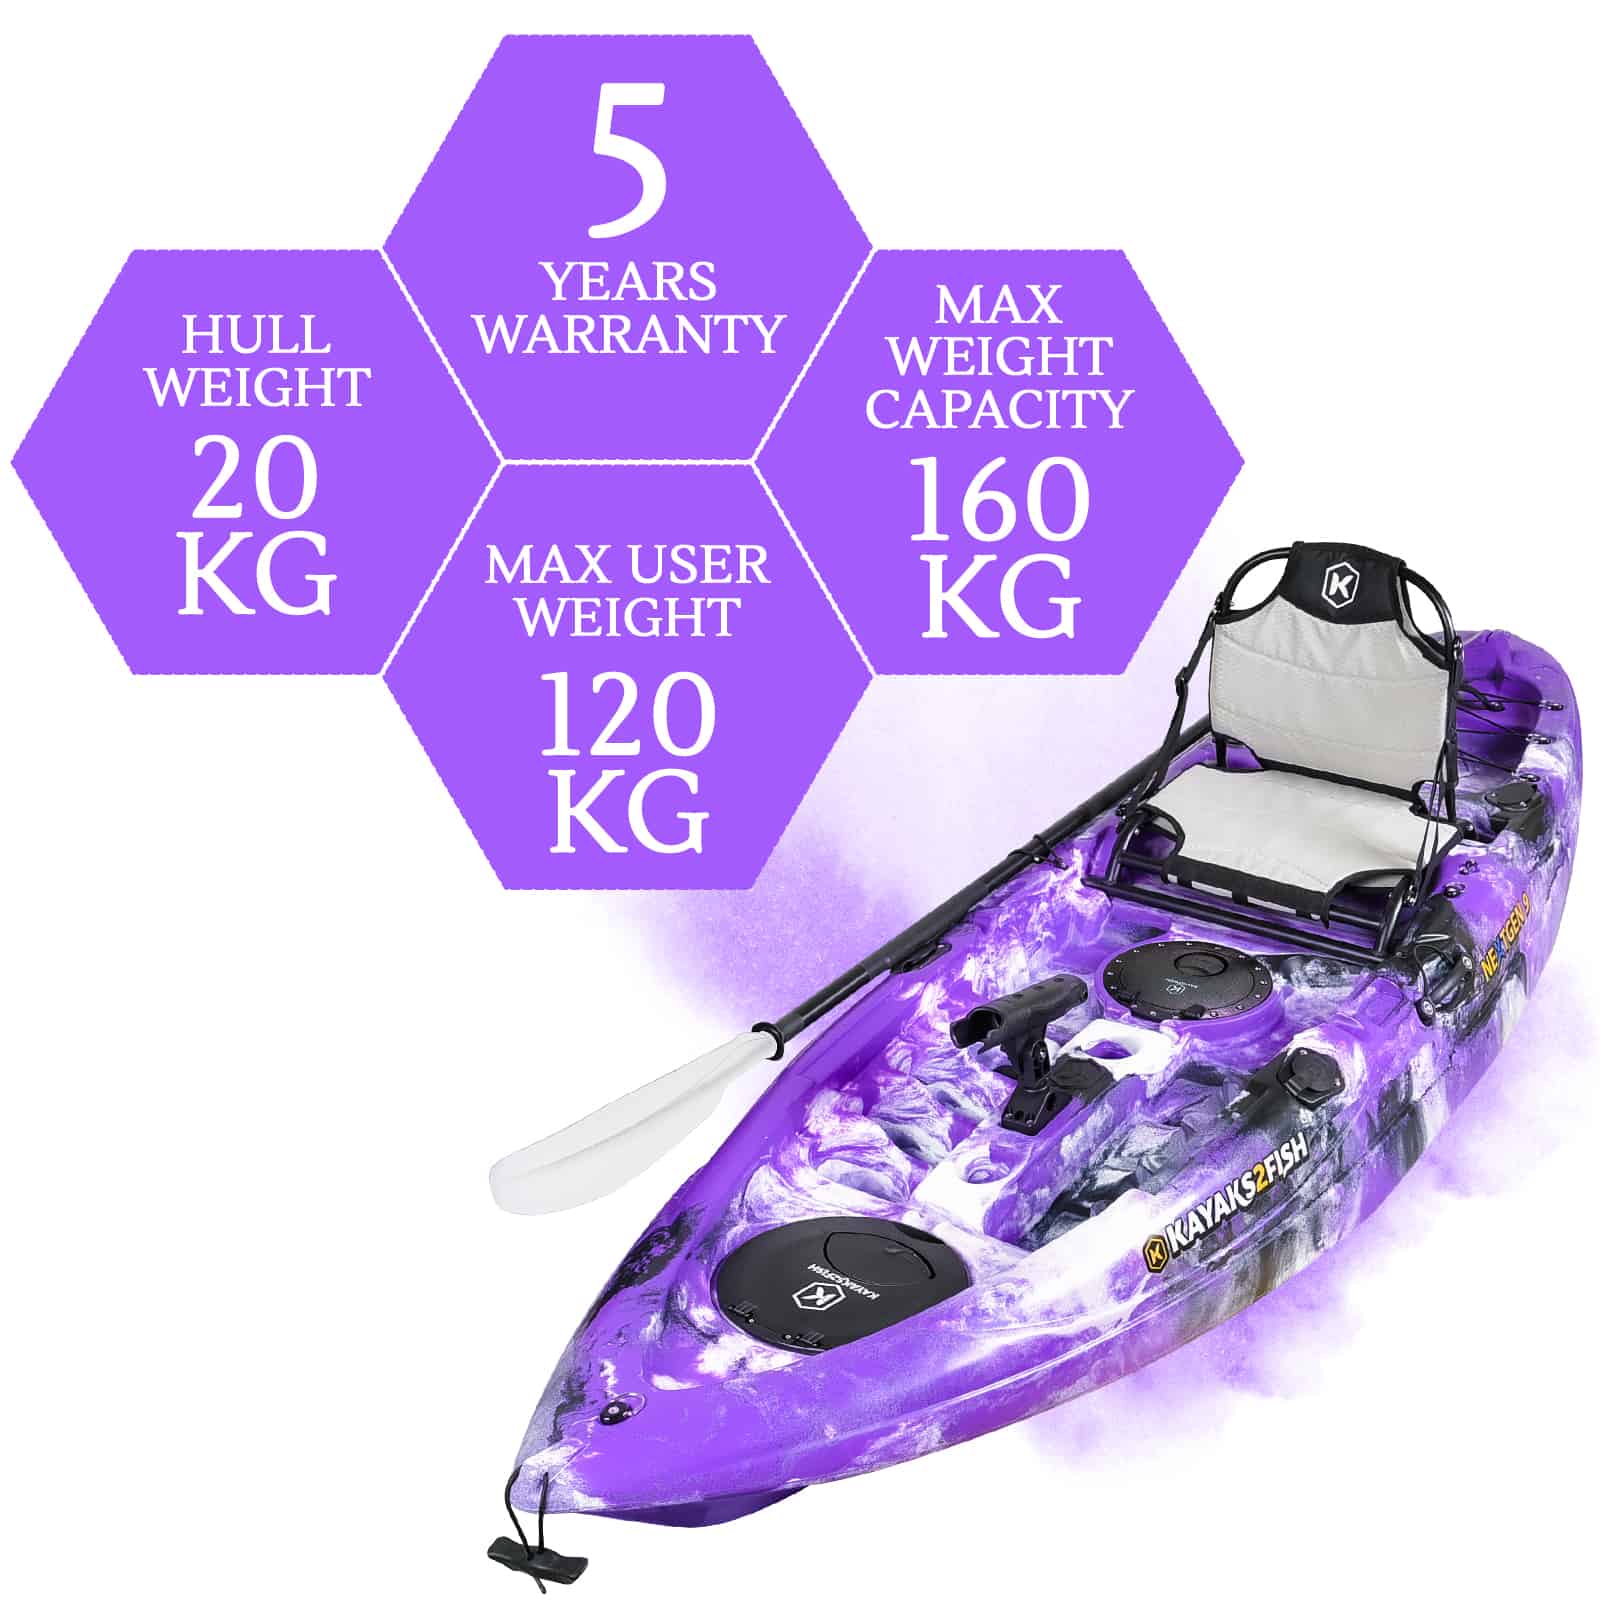 NGS-09-PURPLECAMO specifications